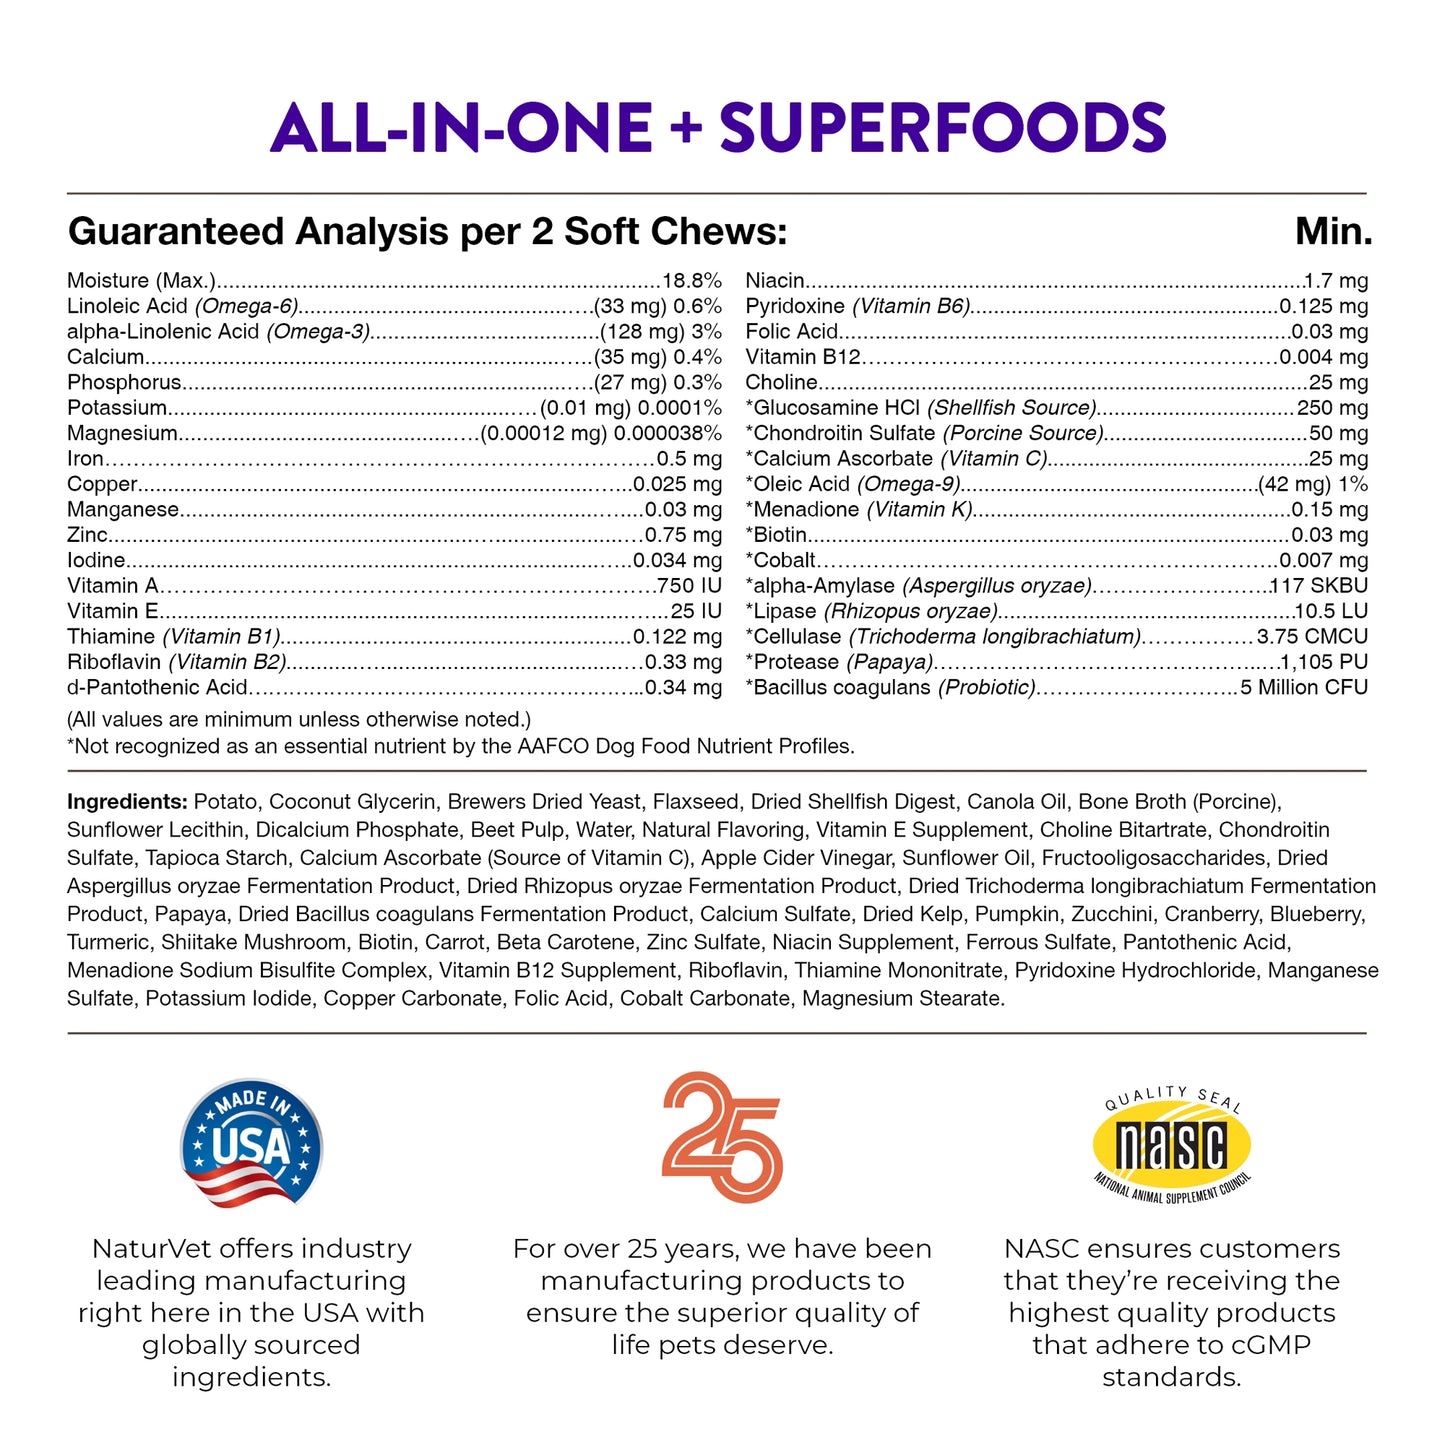 Evolutions - All-in-one + Superfoods Soft Chews